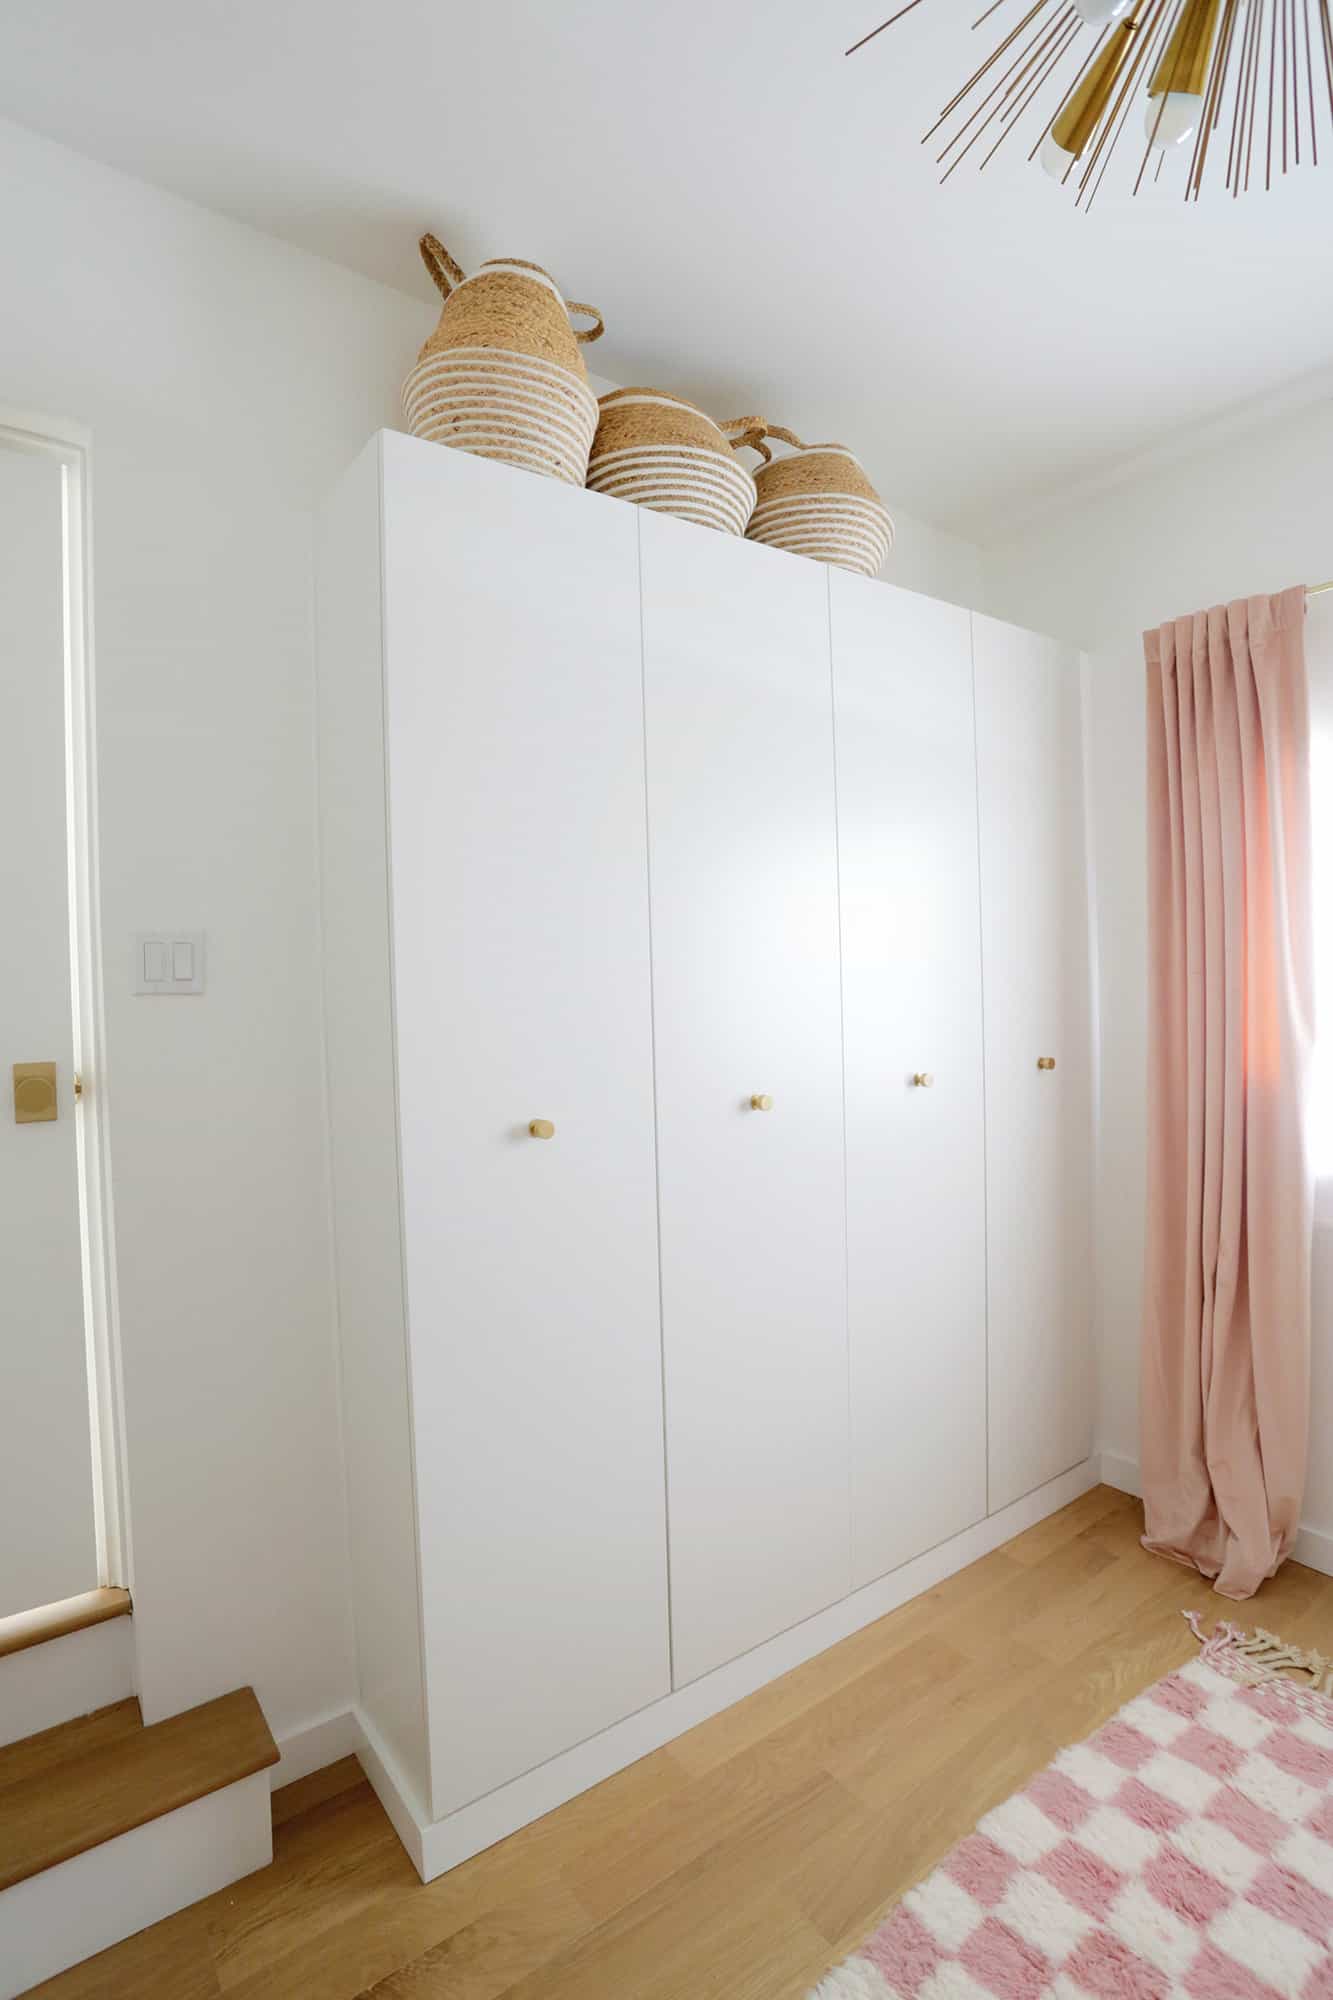 IKEA Pax wardrobes without arched trim added